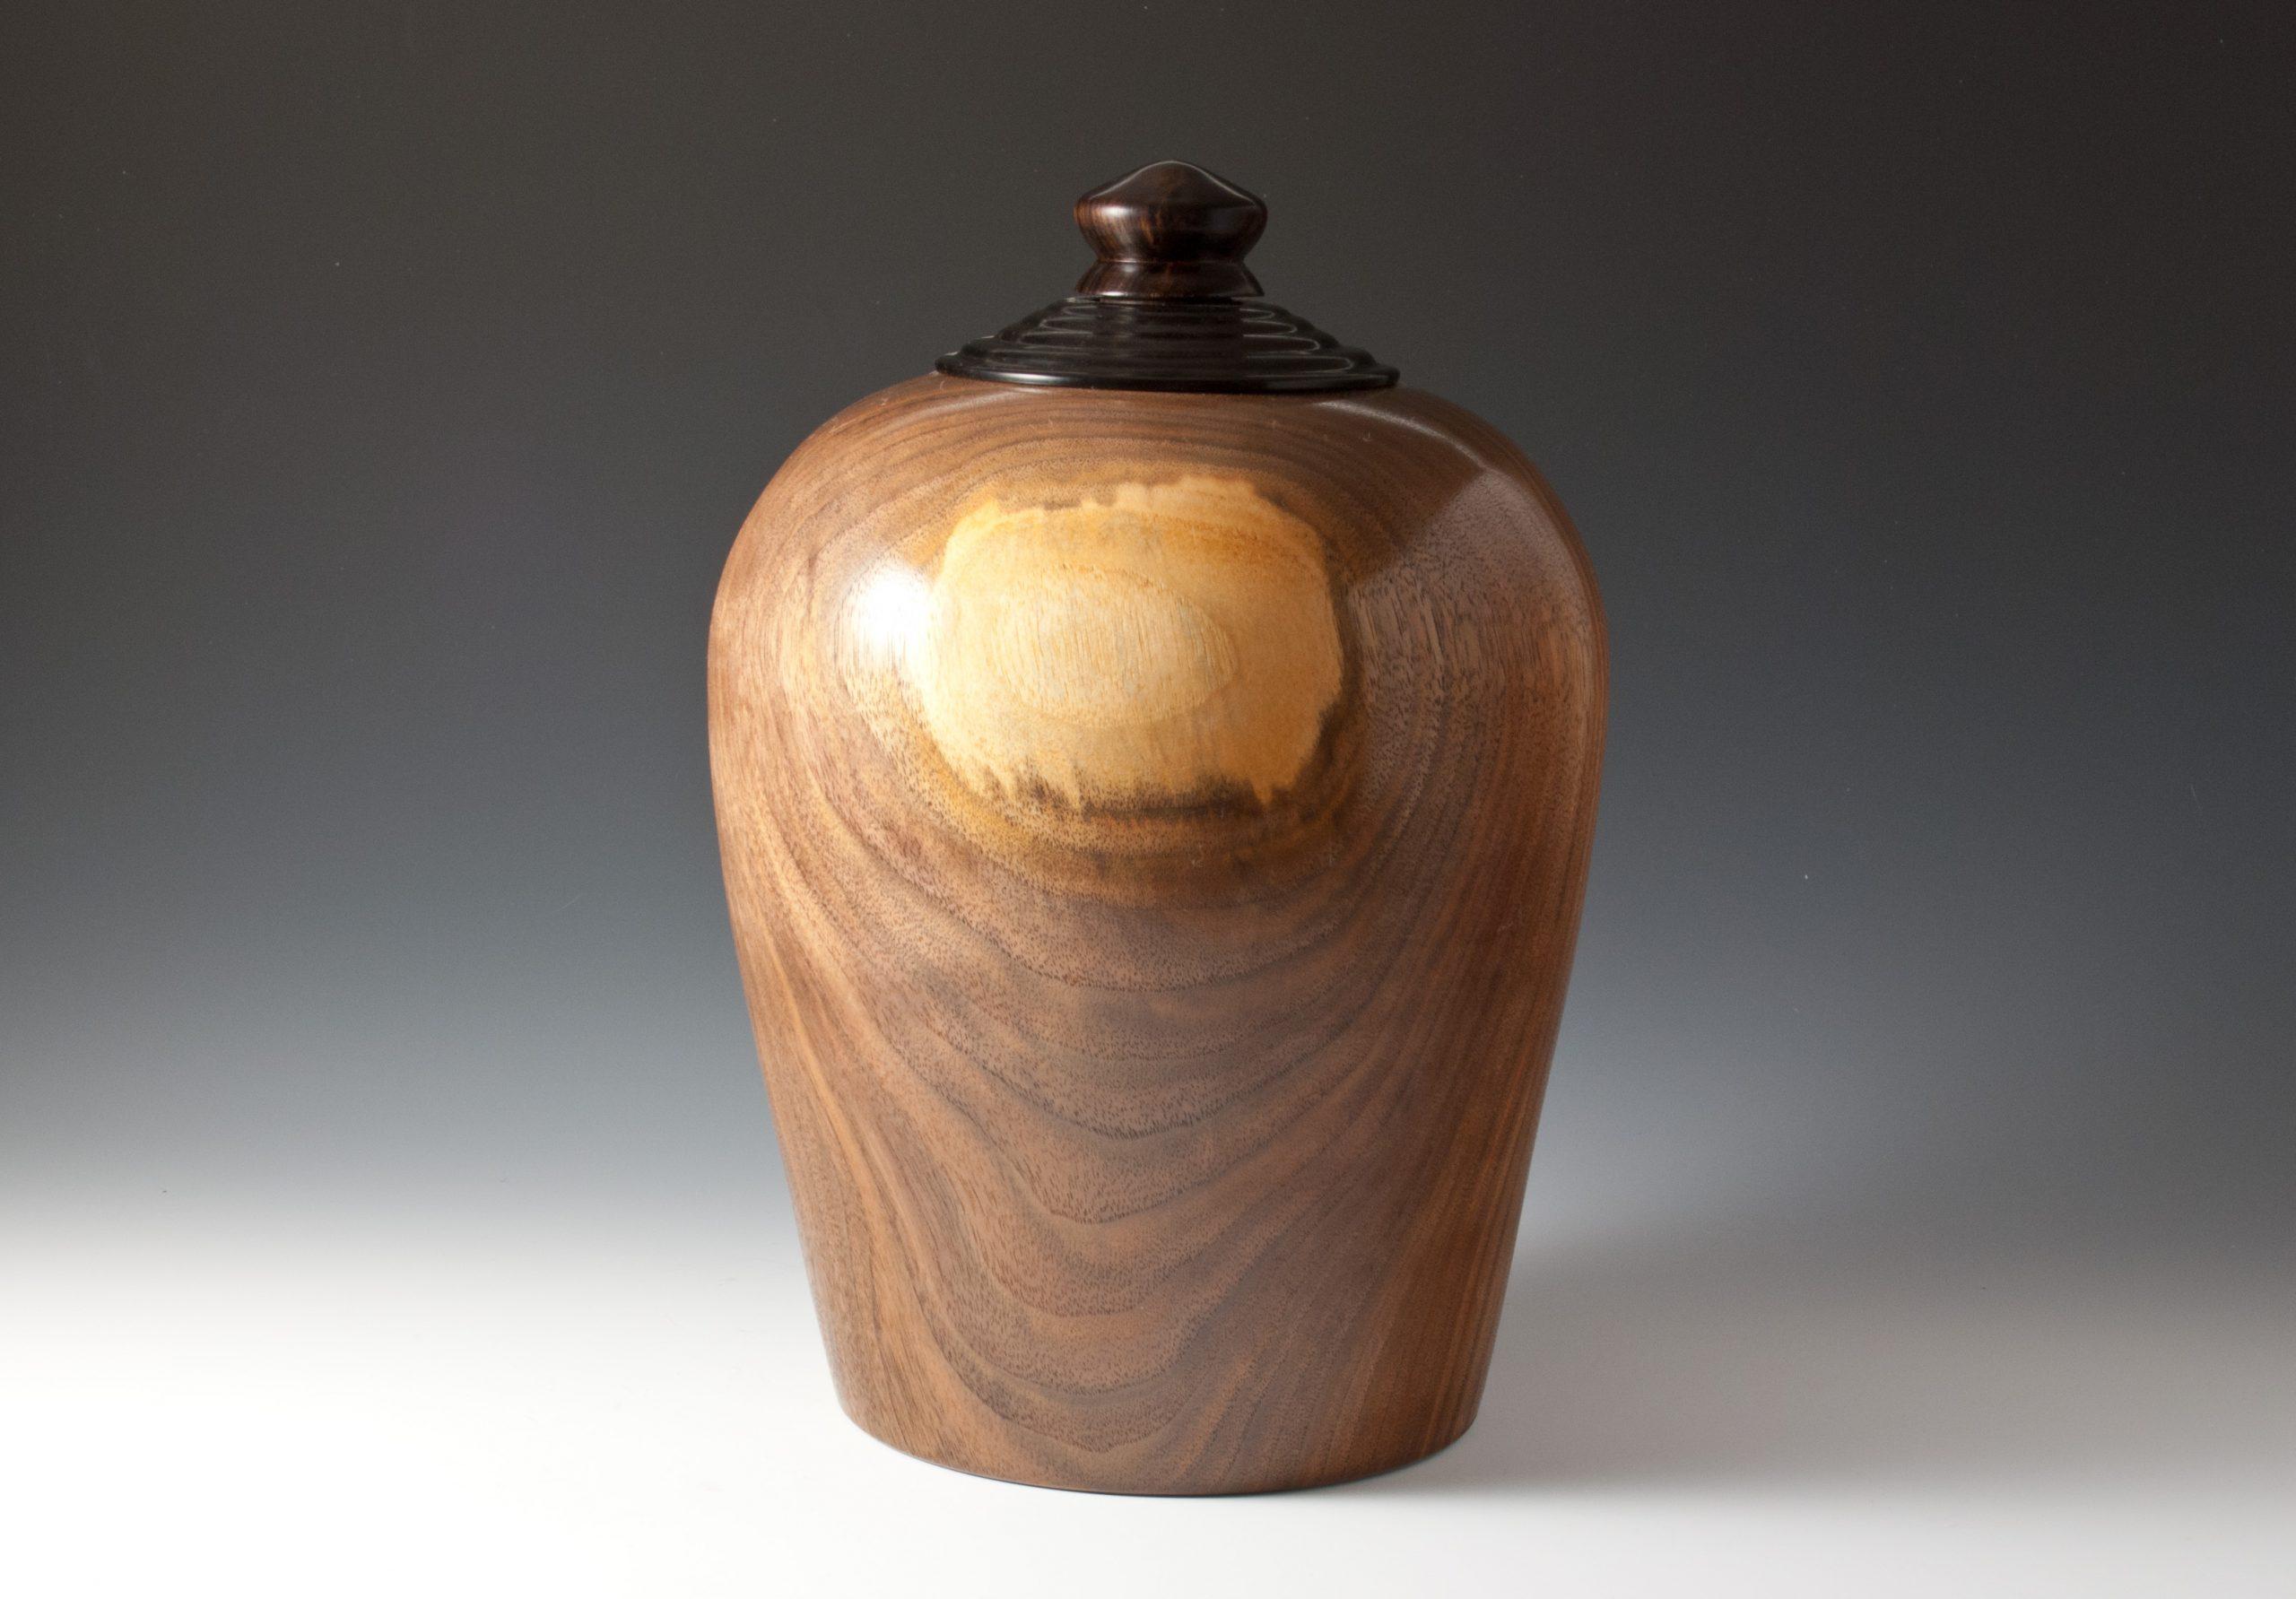 Turned wood cremation urns Montreal